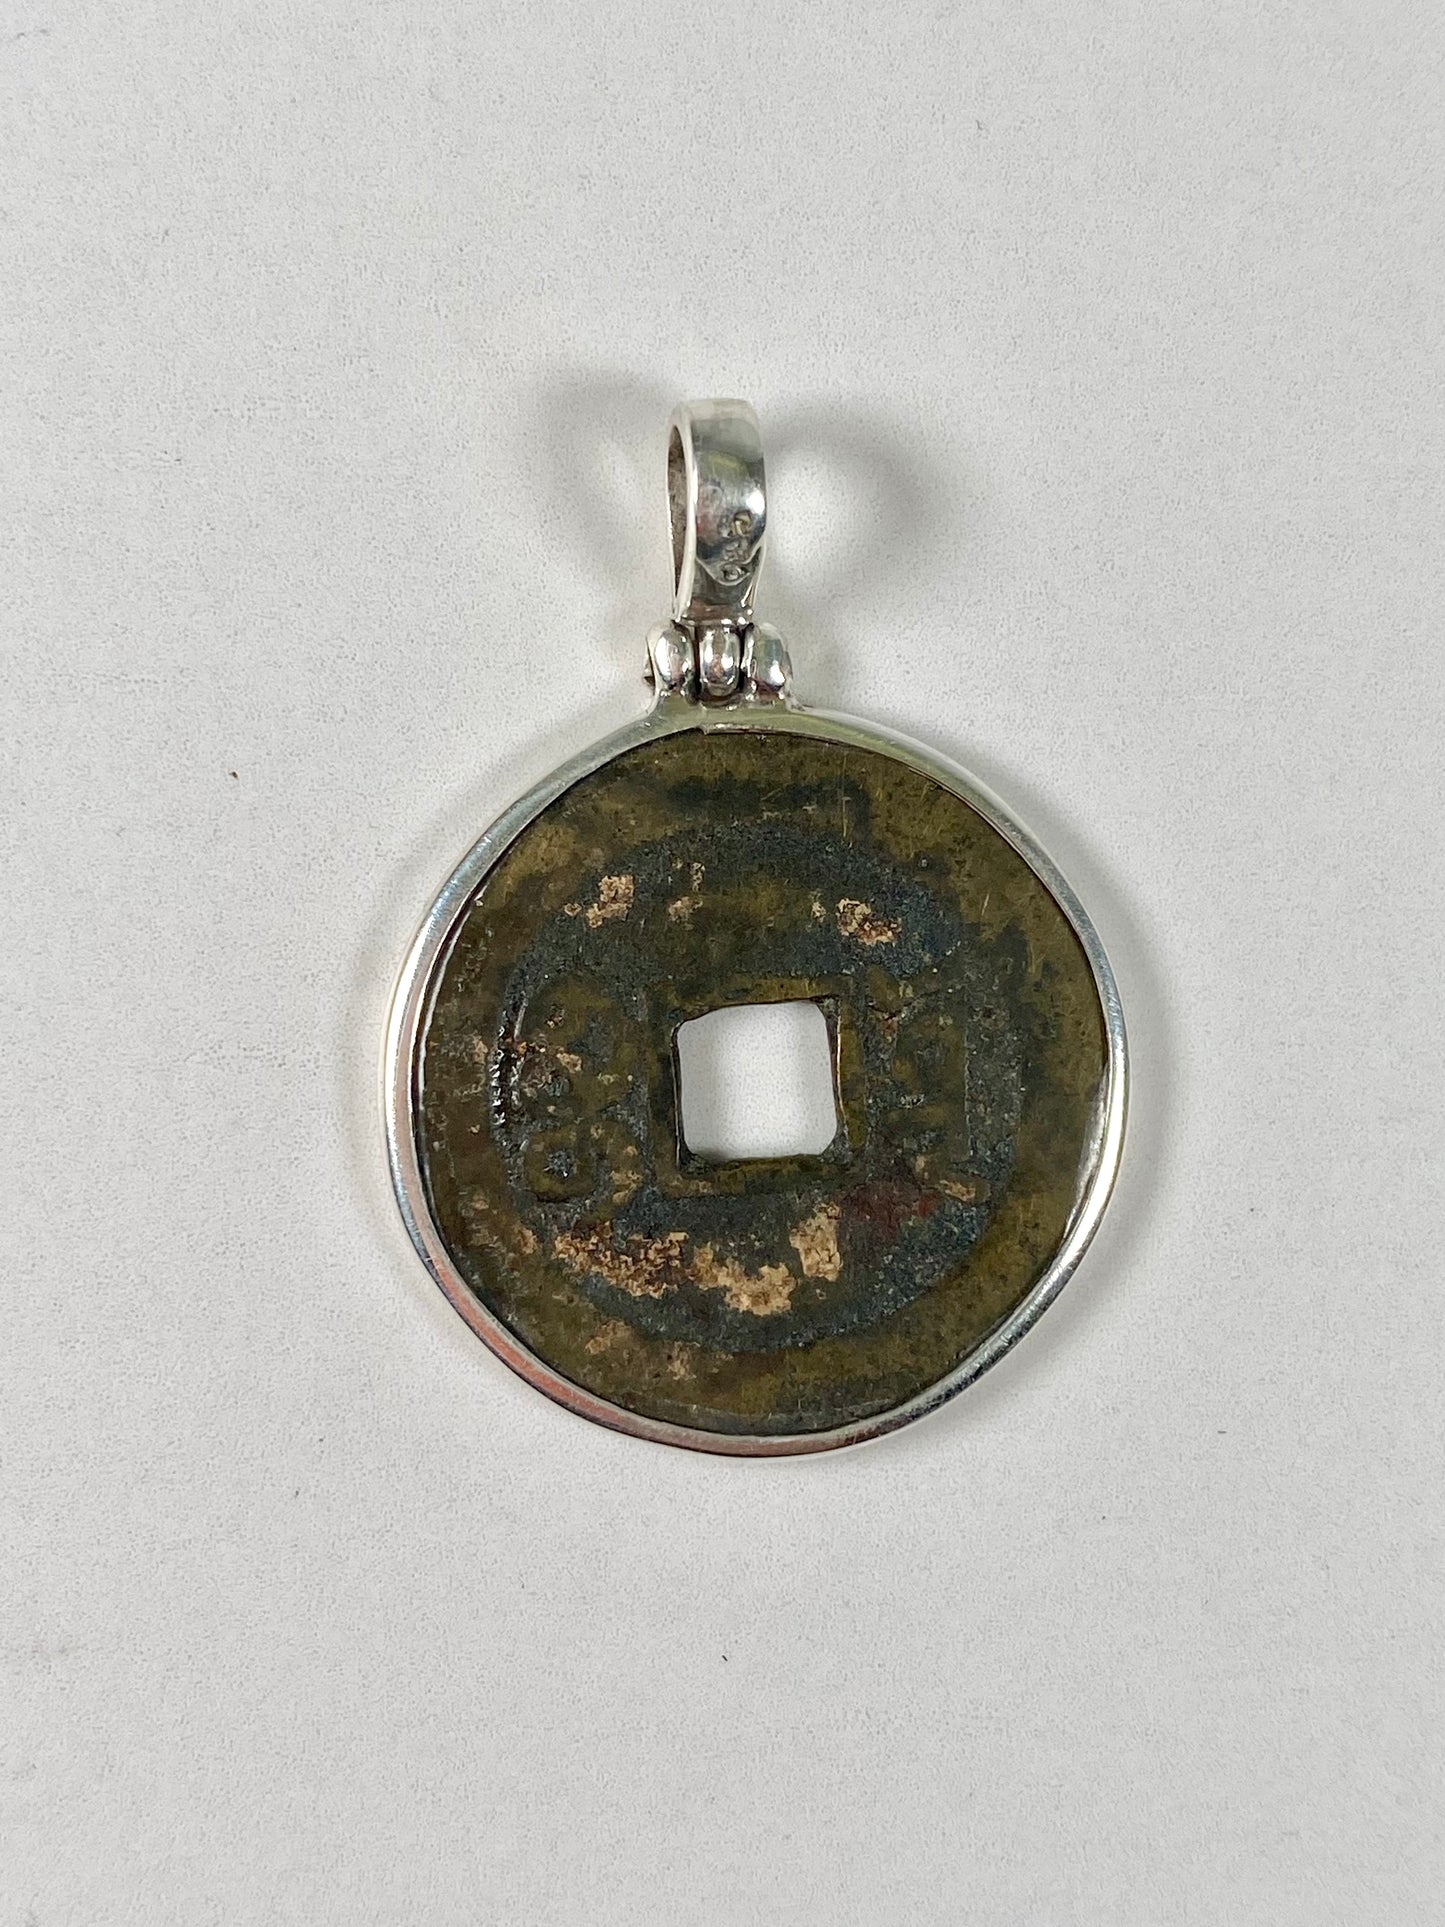 Antique Qing Dynasty Jiaqing Reign (1796-1820) Cash Coin Pendant in Sterling Silver